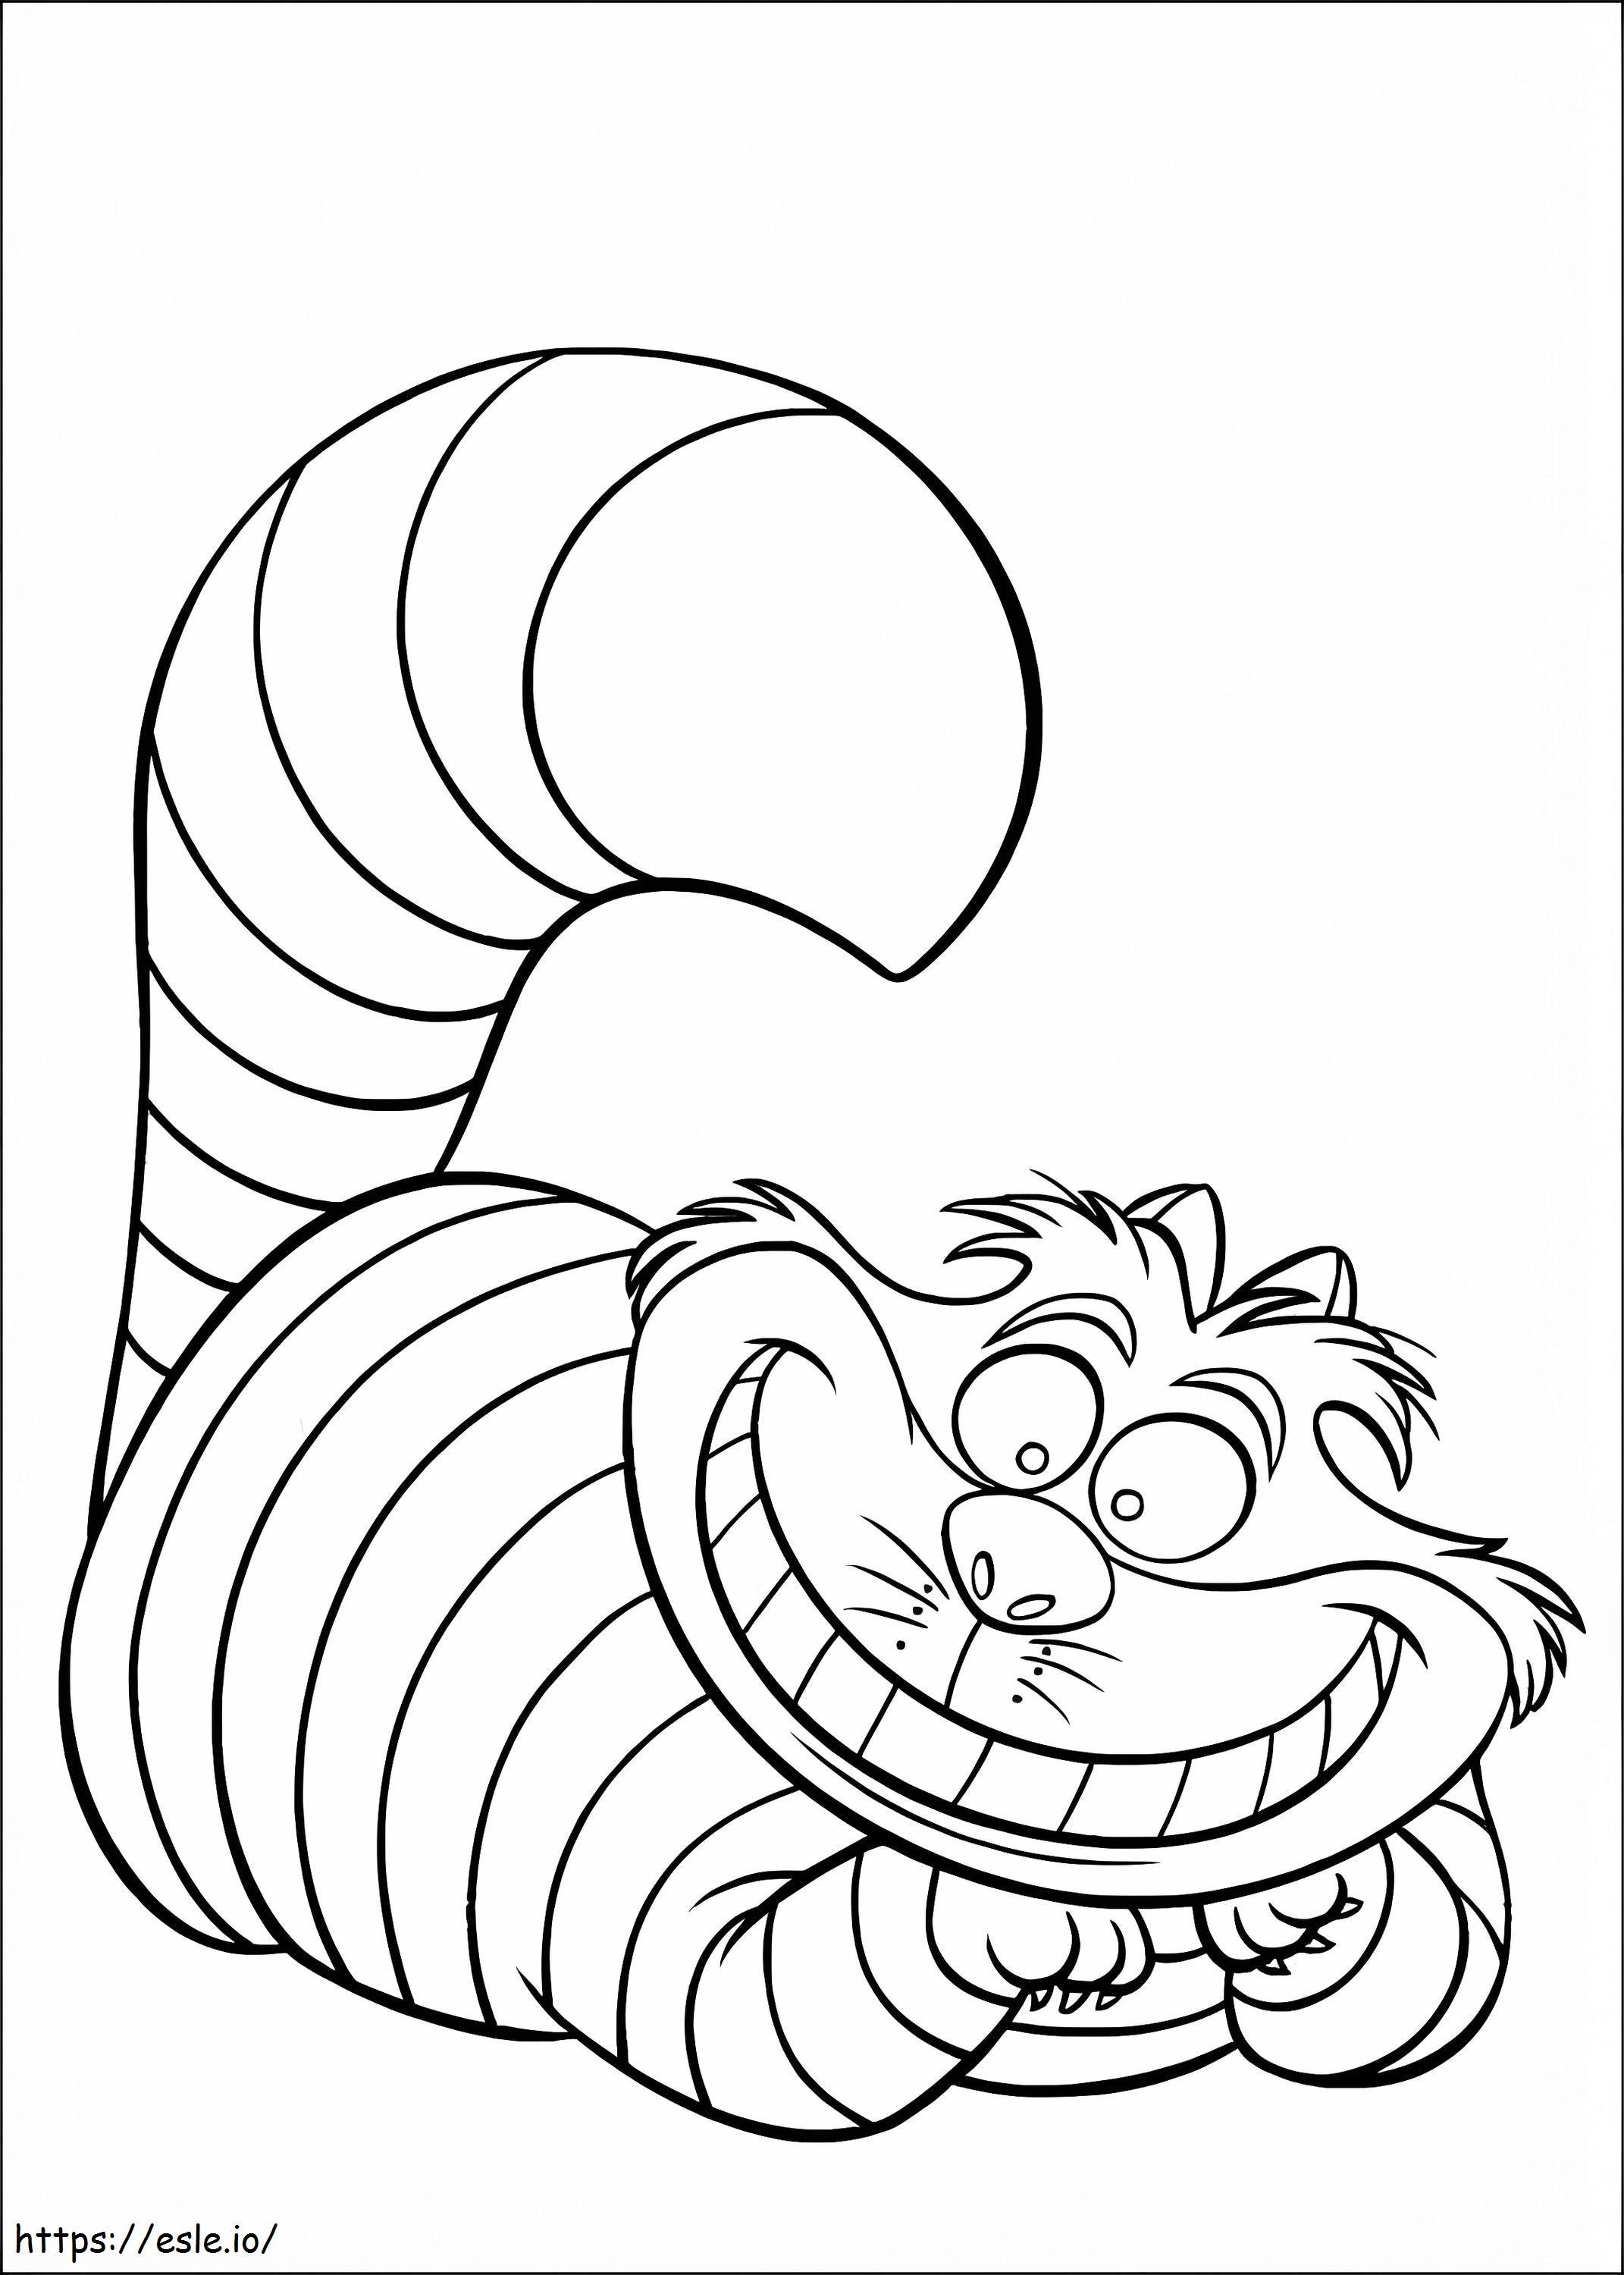 1533352994 Cheshire Cat Smiling A4 coloring page